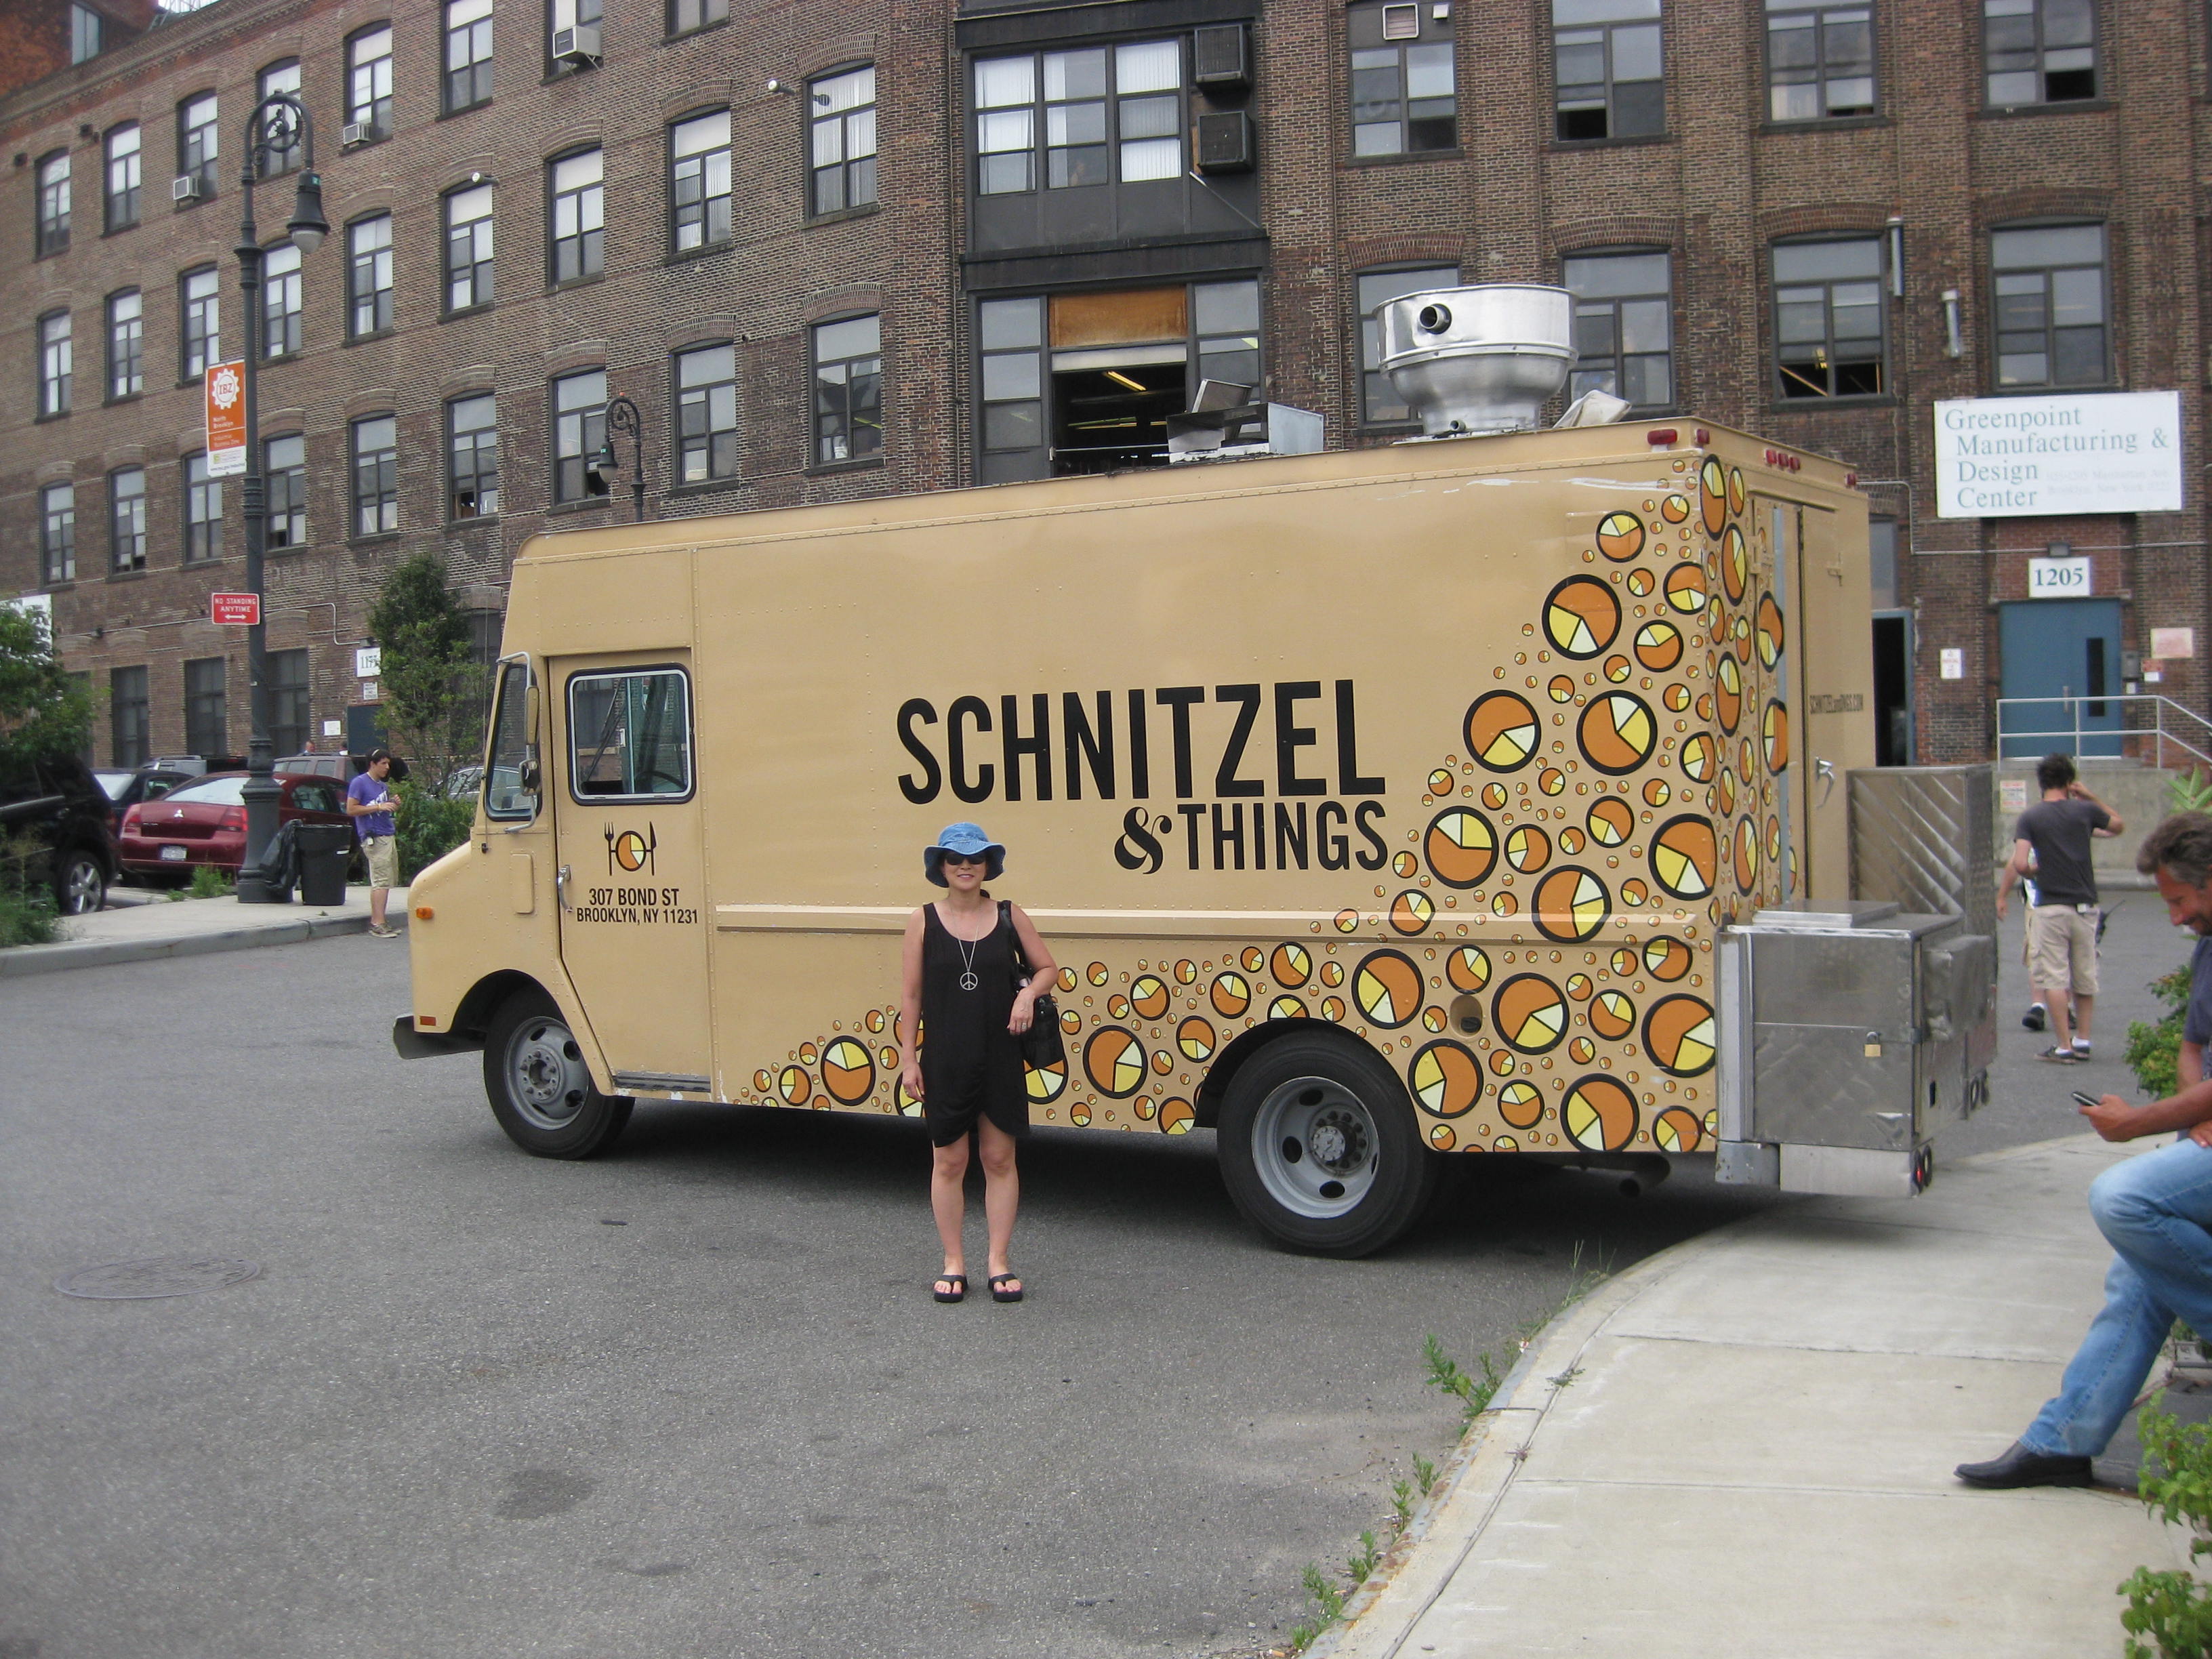 Lil Rhee hanging out at the Schnitzel & Things truck